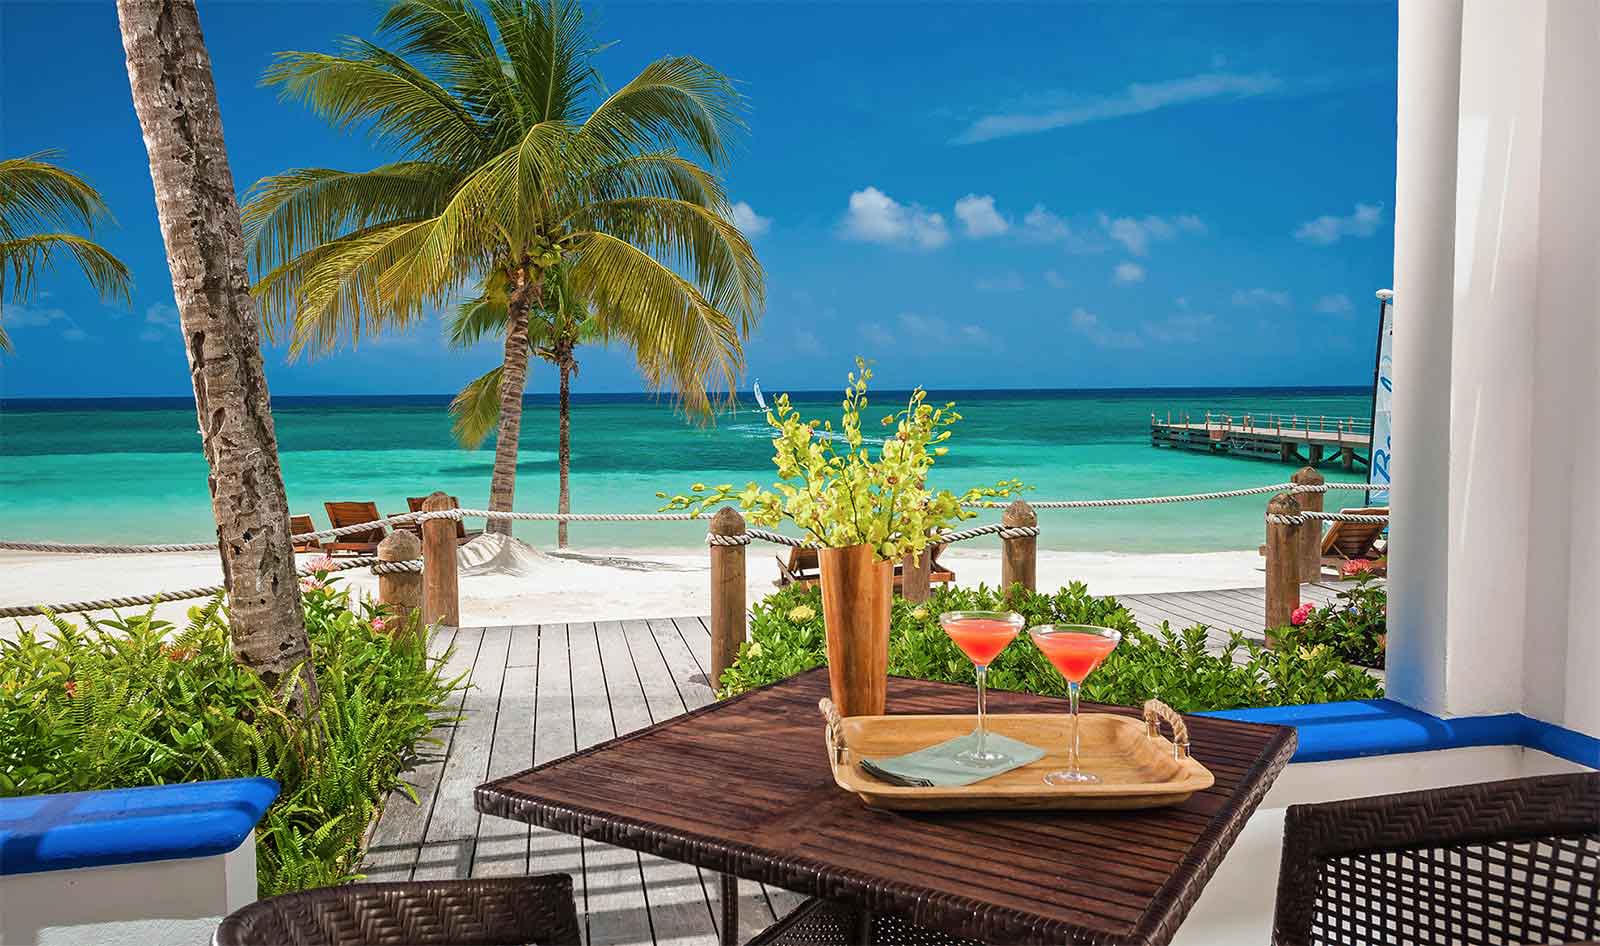 The Top 5 All-Inclusive Vacation Packages in the Caribbean